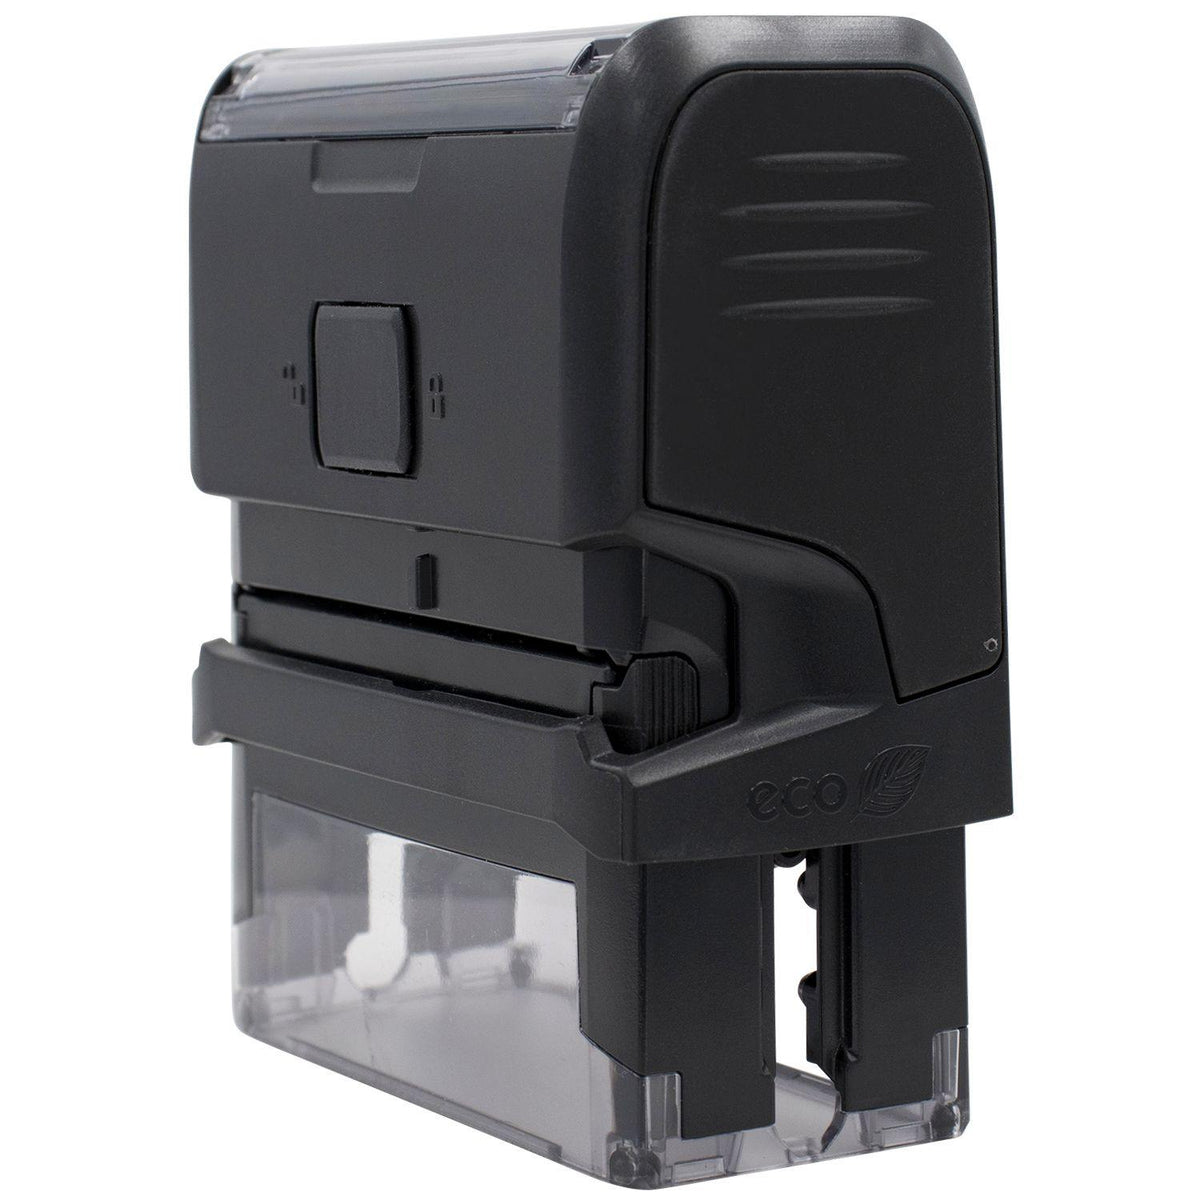 Self Inking Blue Shield Stamp - Engineer Seal Stamps - Brand_Trodat, Impression Size_Small, Stamp Type_Self-Inking Stamp, Type of Use_Medical Office